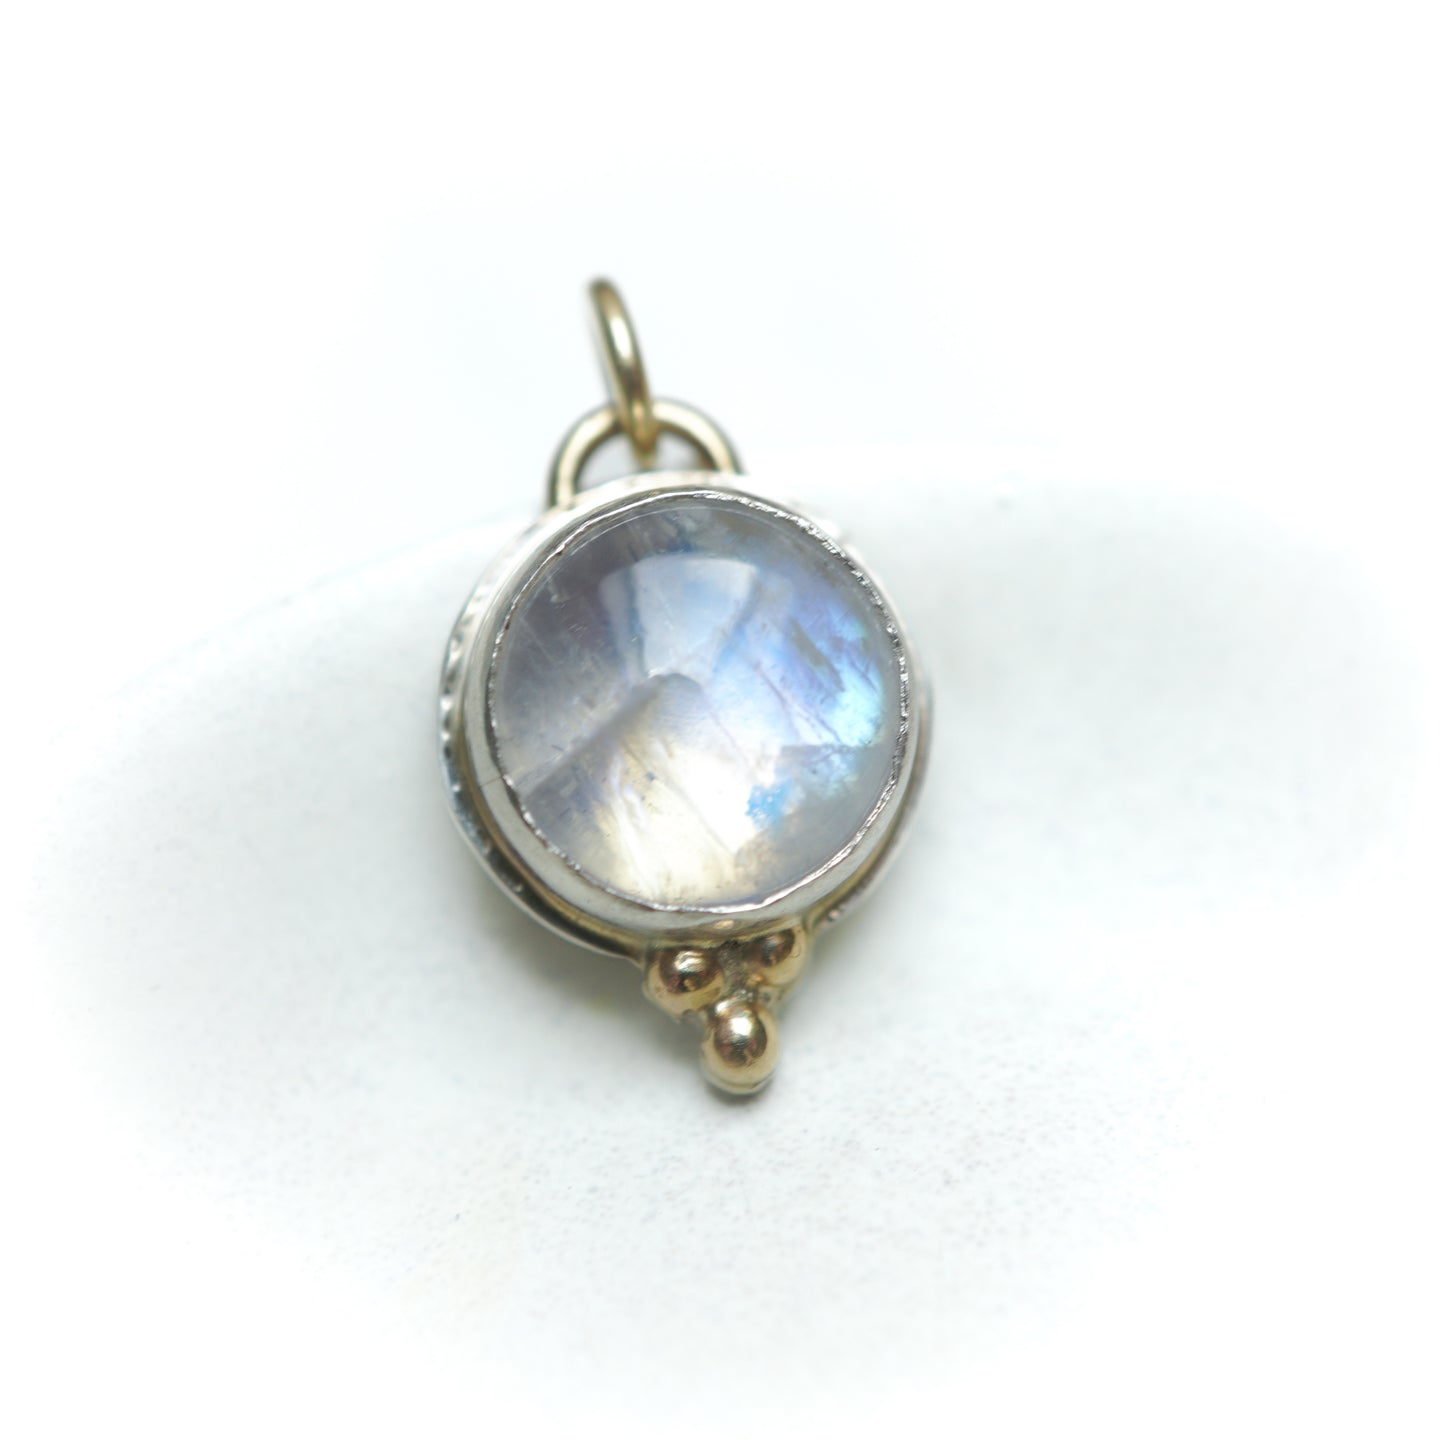 Glowing Moonstone Pendant - Sterling Silver & 9ct Gold